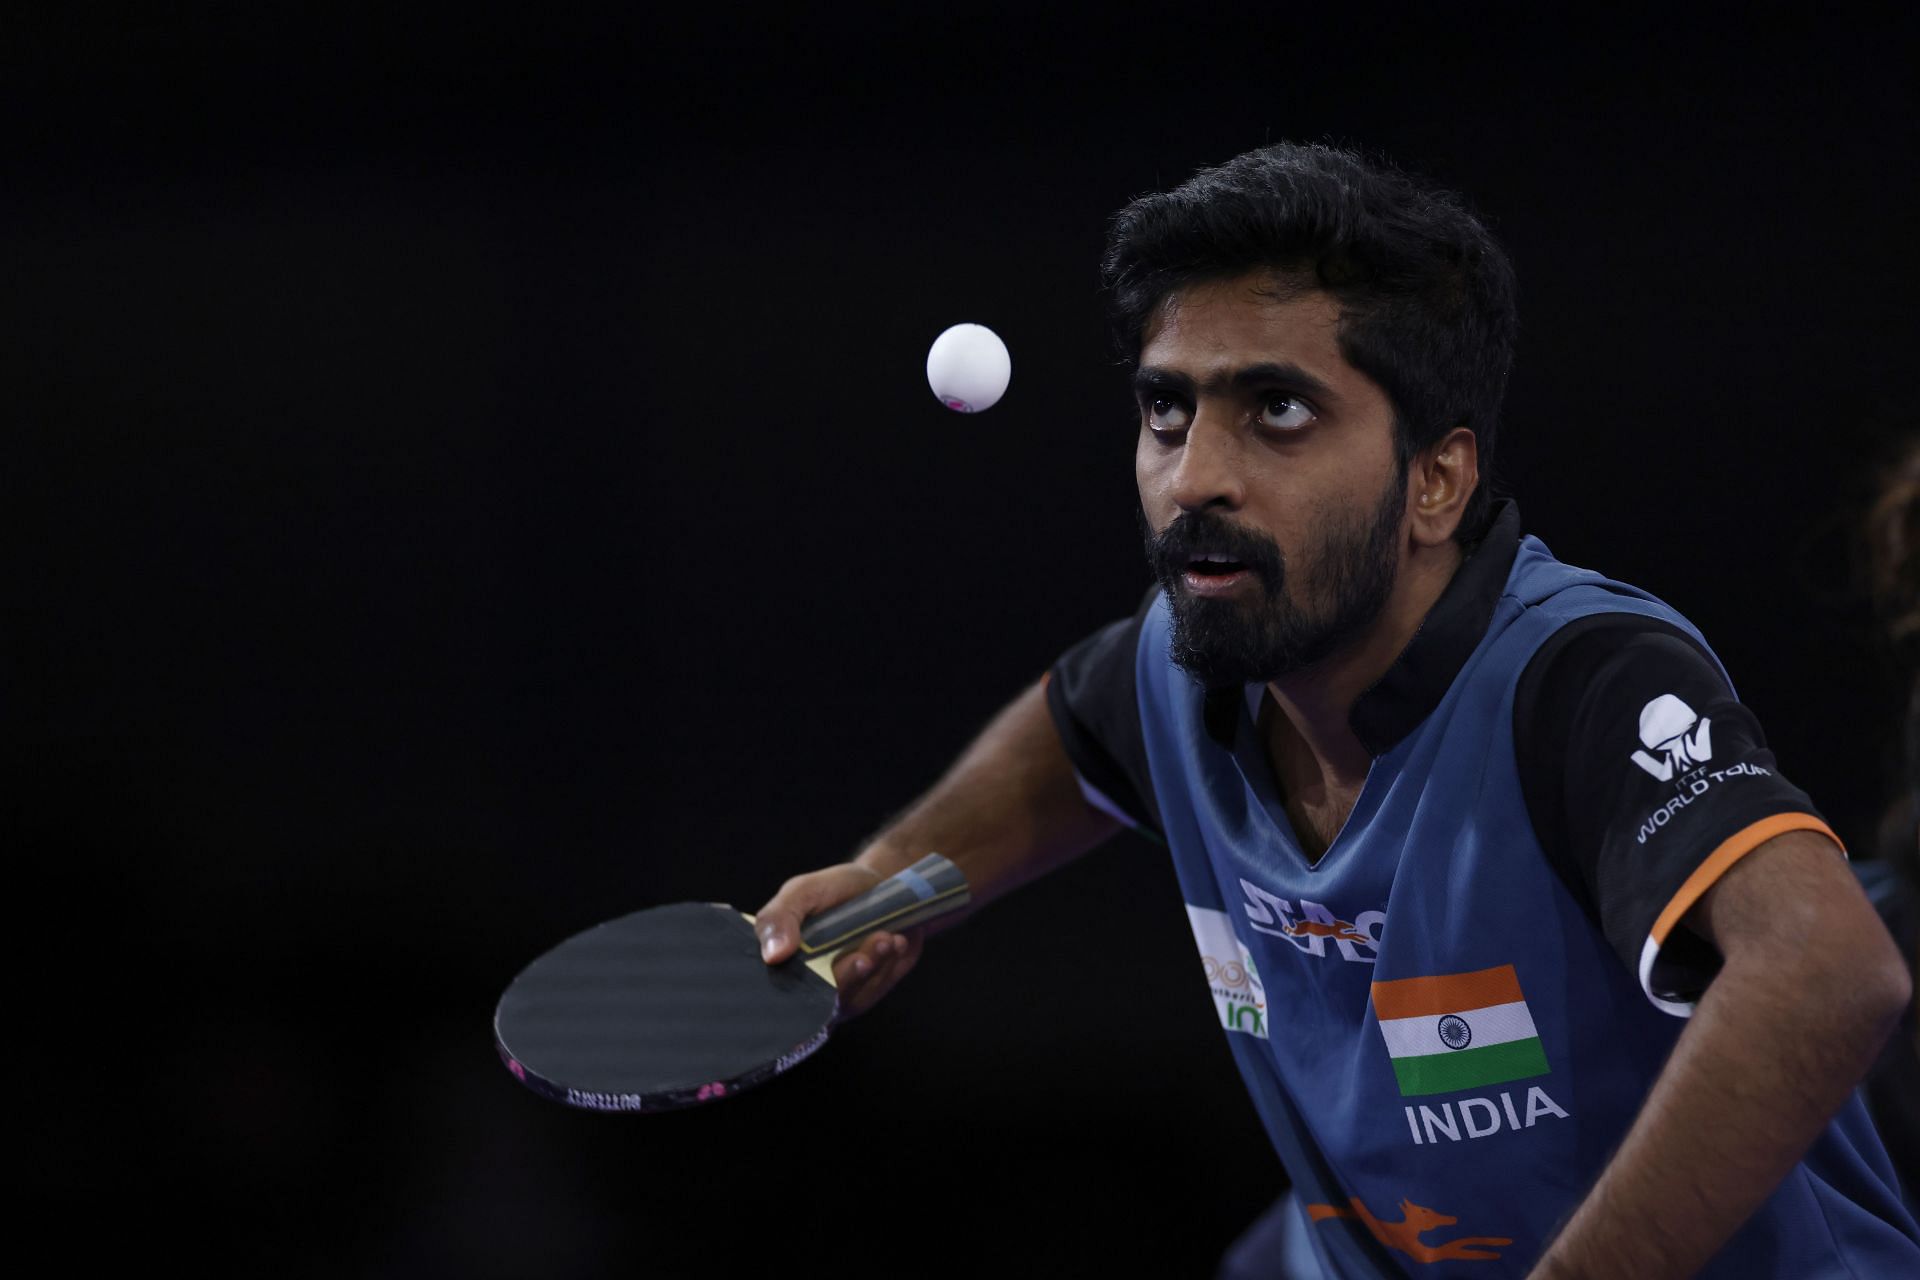 A file photo of PSPB player Sathiyan Gnanasekaran. (PC: Getty Images)